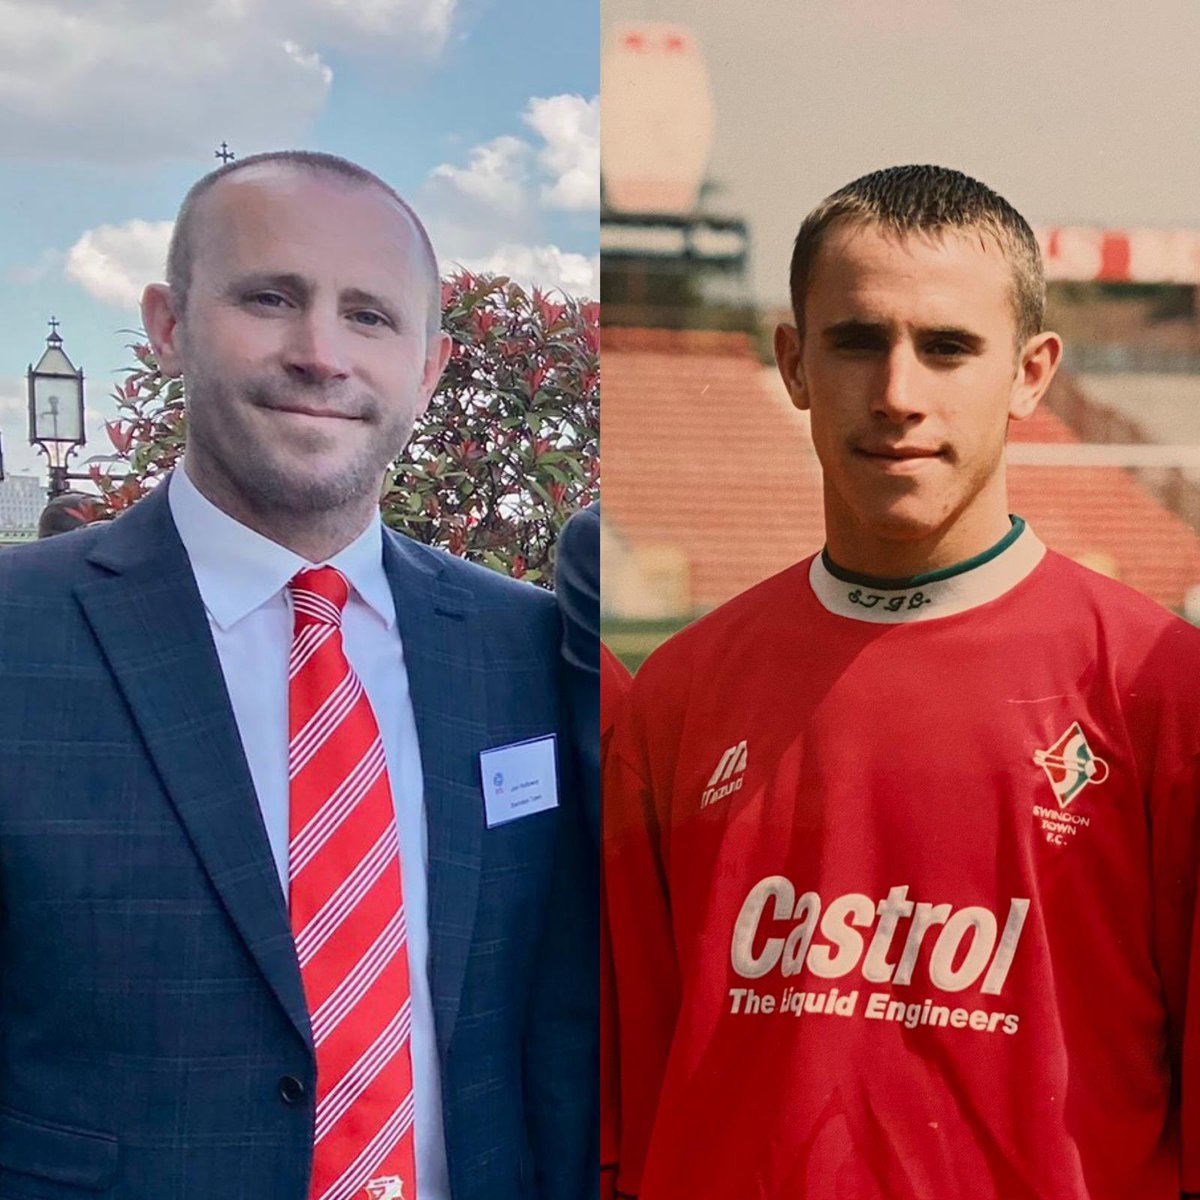 It was 30 years ago today that our Head of Foundation joined @Official_STFC as a full-time young professional. 

Jon has played an instrumental role in driving the Community Foundation forward since taking on the role back in 1996. 

Today we celebrate this special anniversary,…